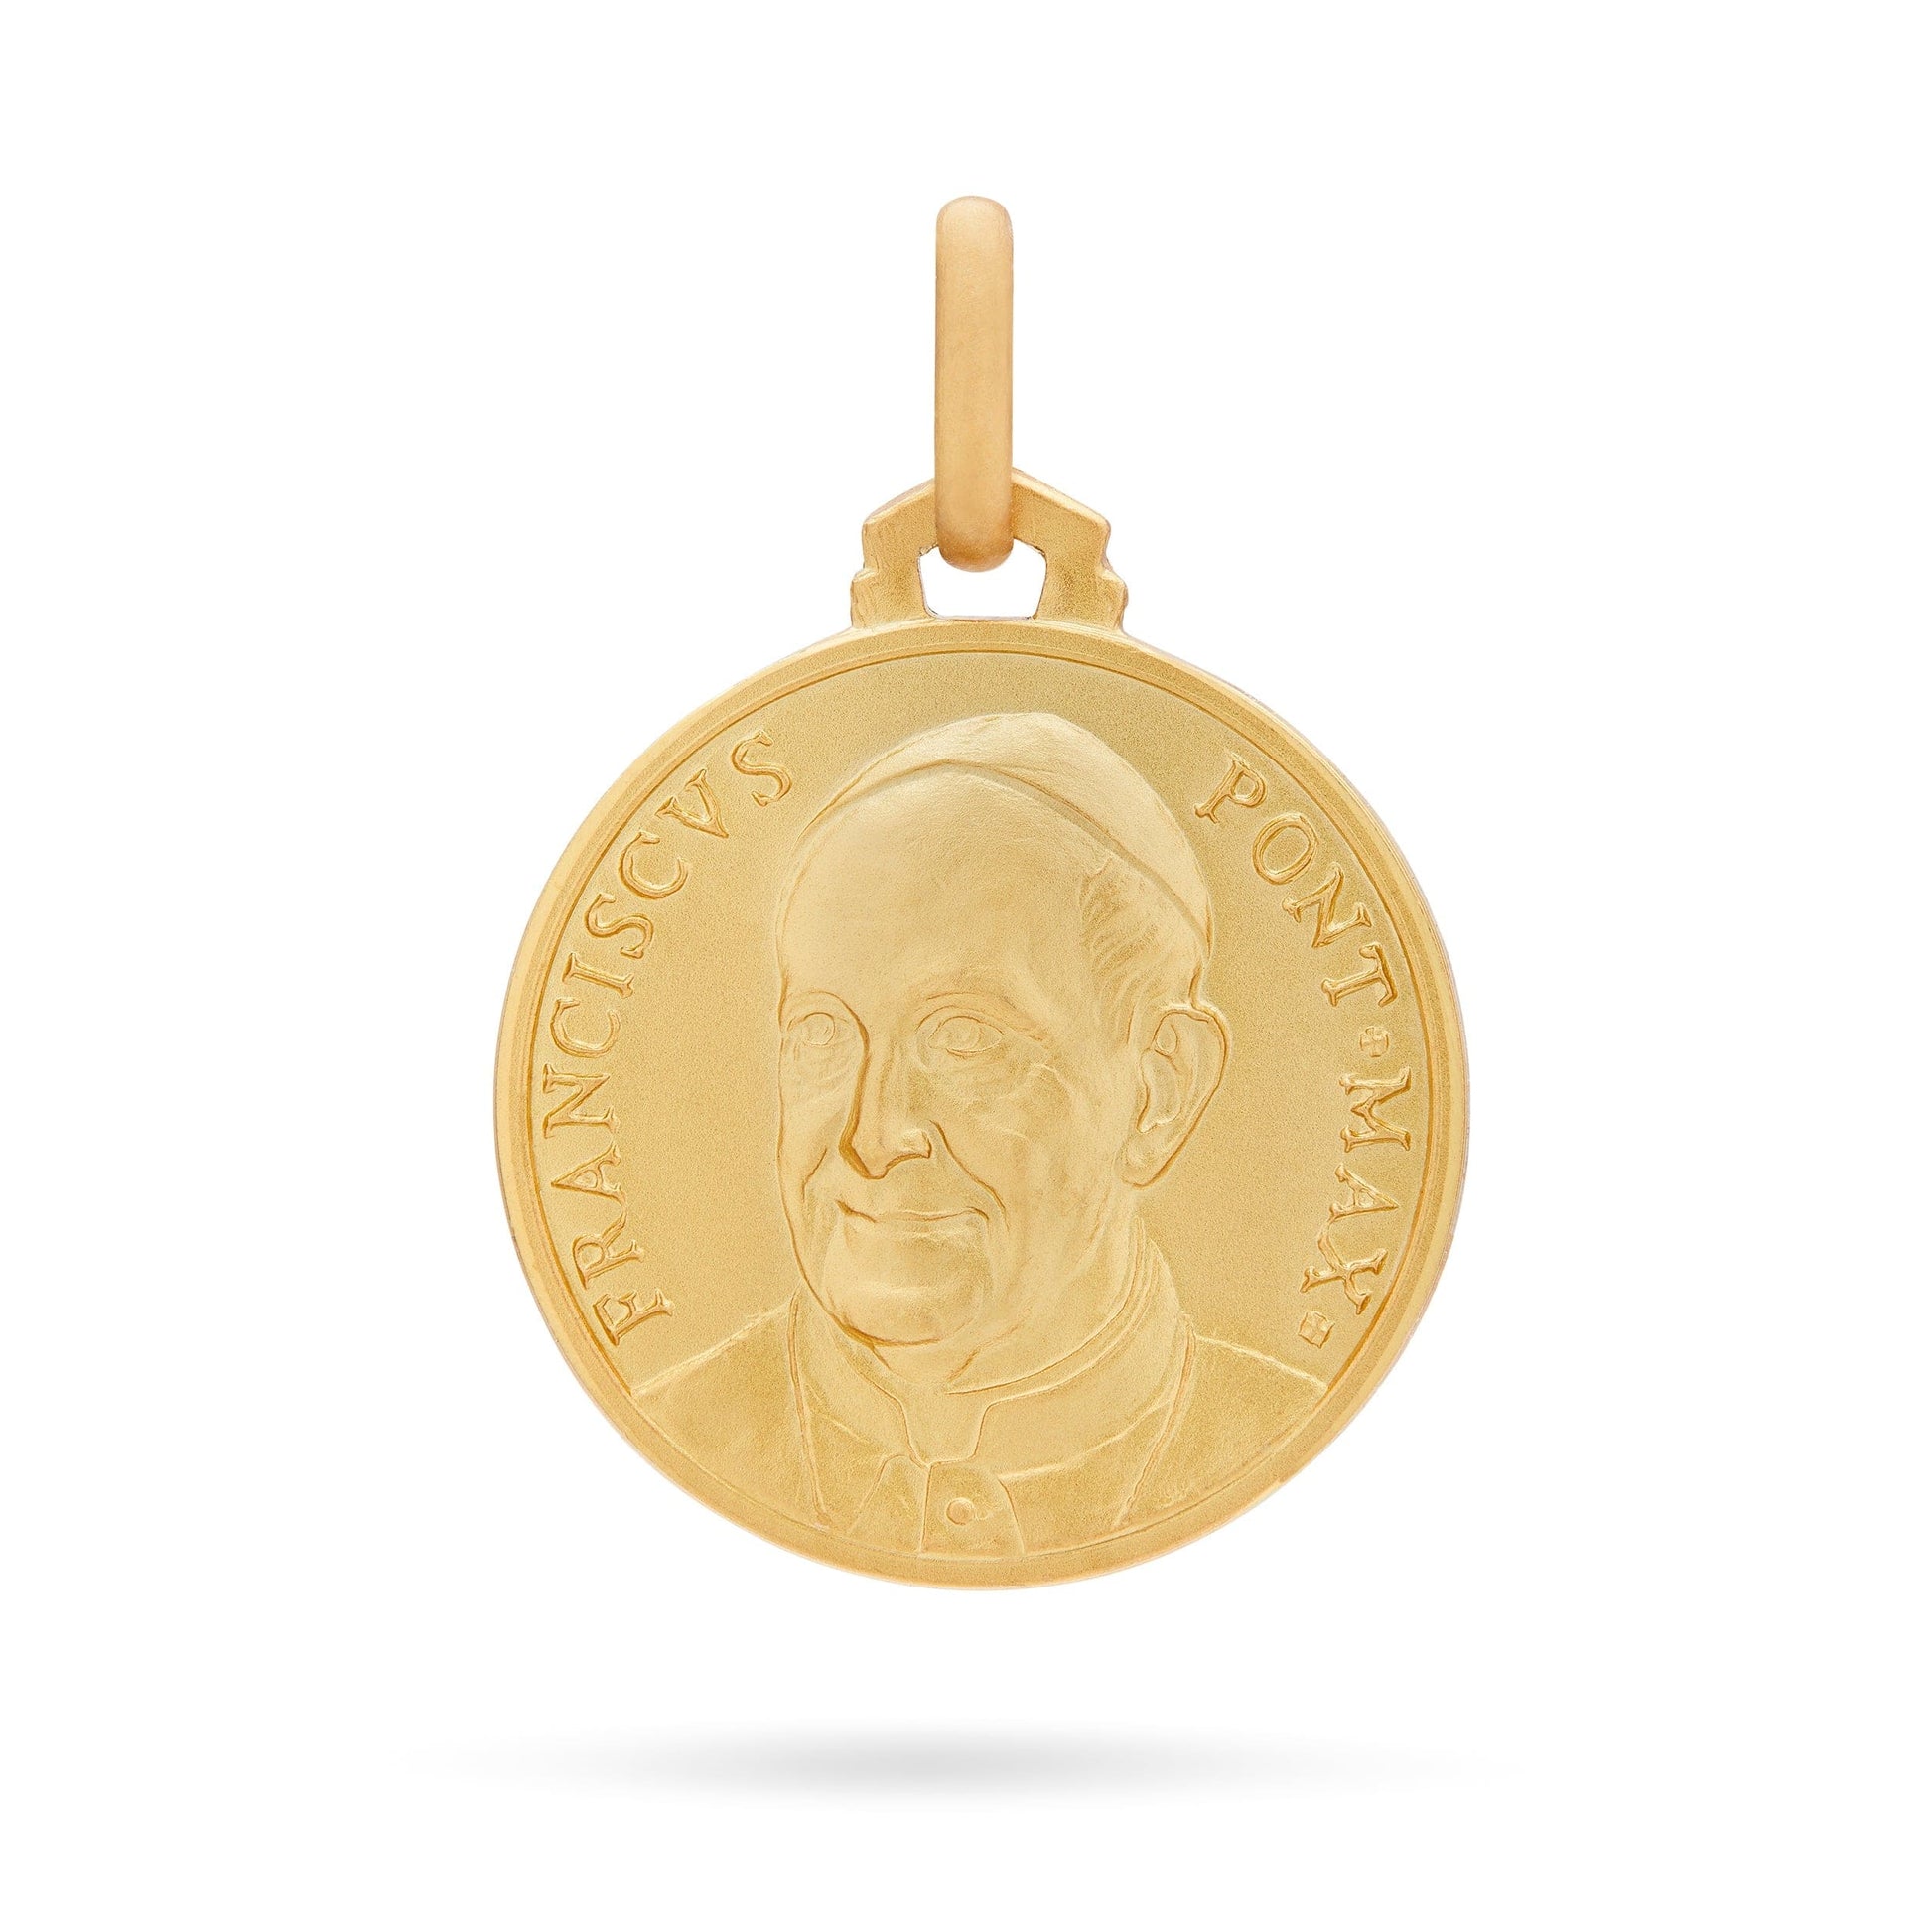 MONDO CATTOLICO Jewelry 18 mm (0.70 in) Gold medal of Pope Francis